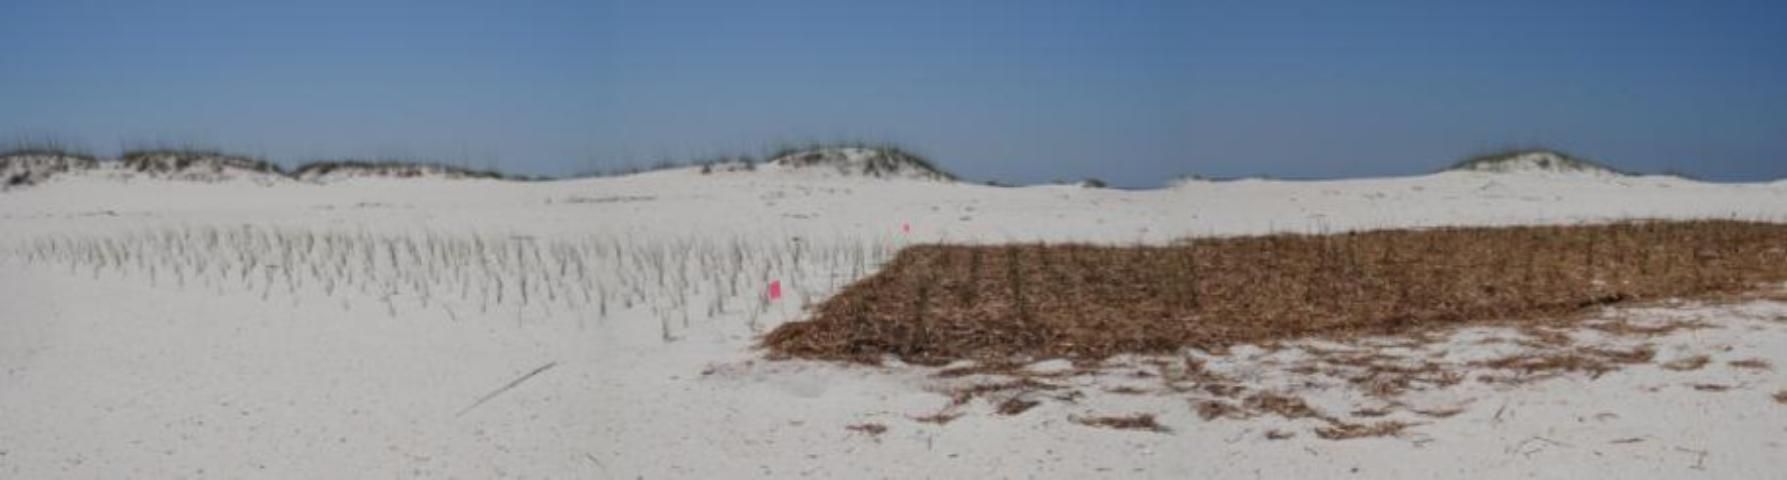 Figure 3. Sea oats planting with and without surrogate wrack (wheat straw) at one of 6 research sites on Perdido Key, FL.